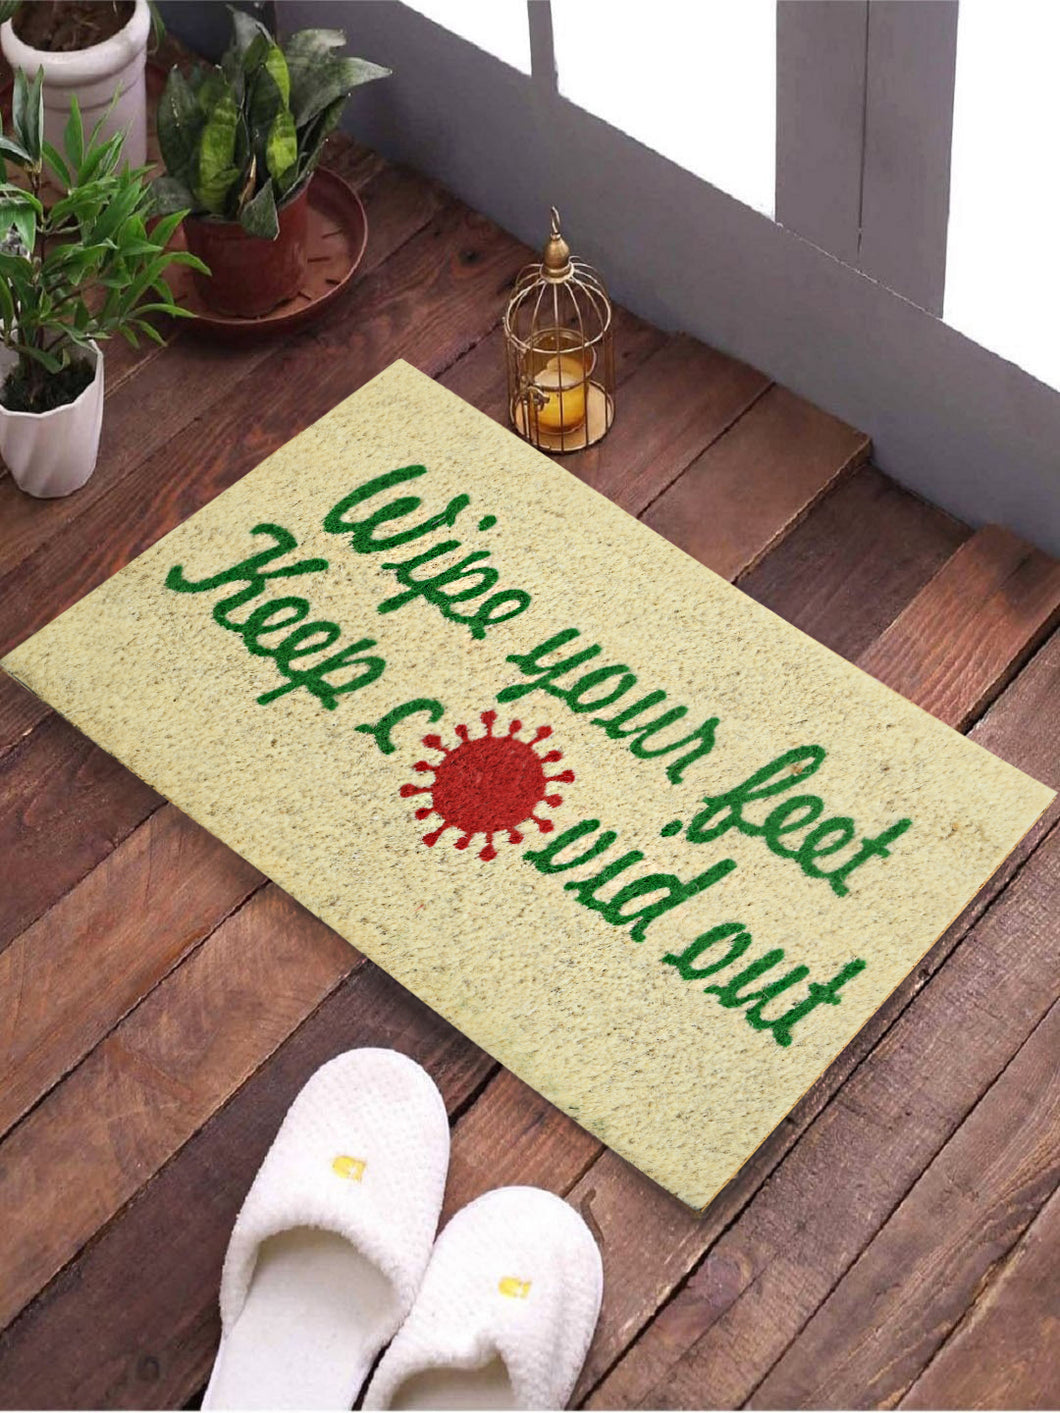 <h4>SWHF Coir Door Mat with Anti Skid Rubberized Backing: (Wipe Your feet Keep covid Out)</h4>